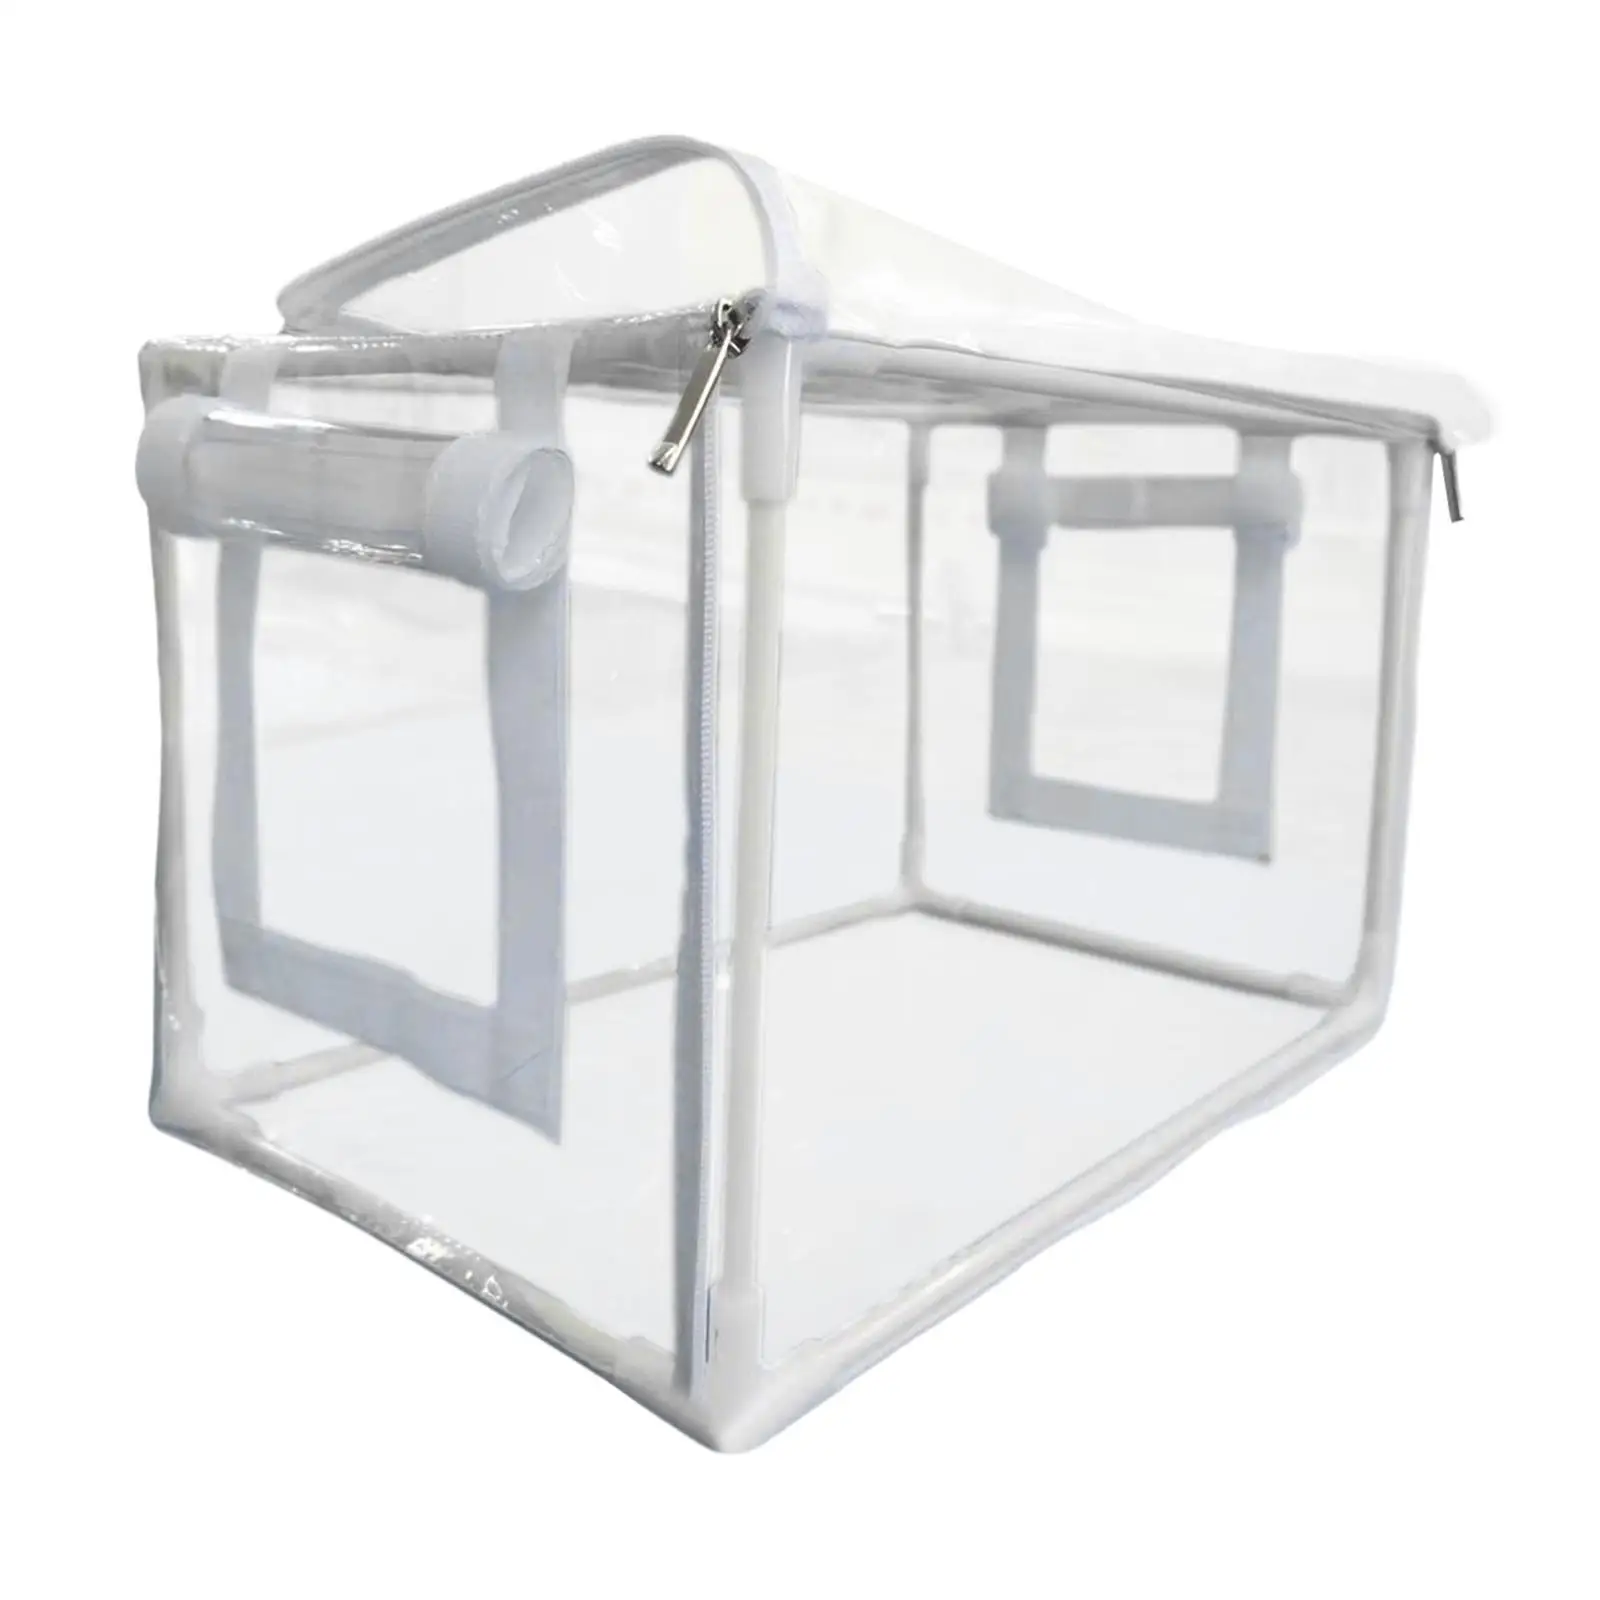 Still Air Box Vegetable Indoor Outdoor Reusable Easy to Use for Gardening Plants Waterproof Clear Greenhouse Garden Greenhouse